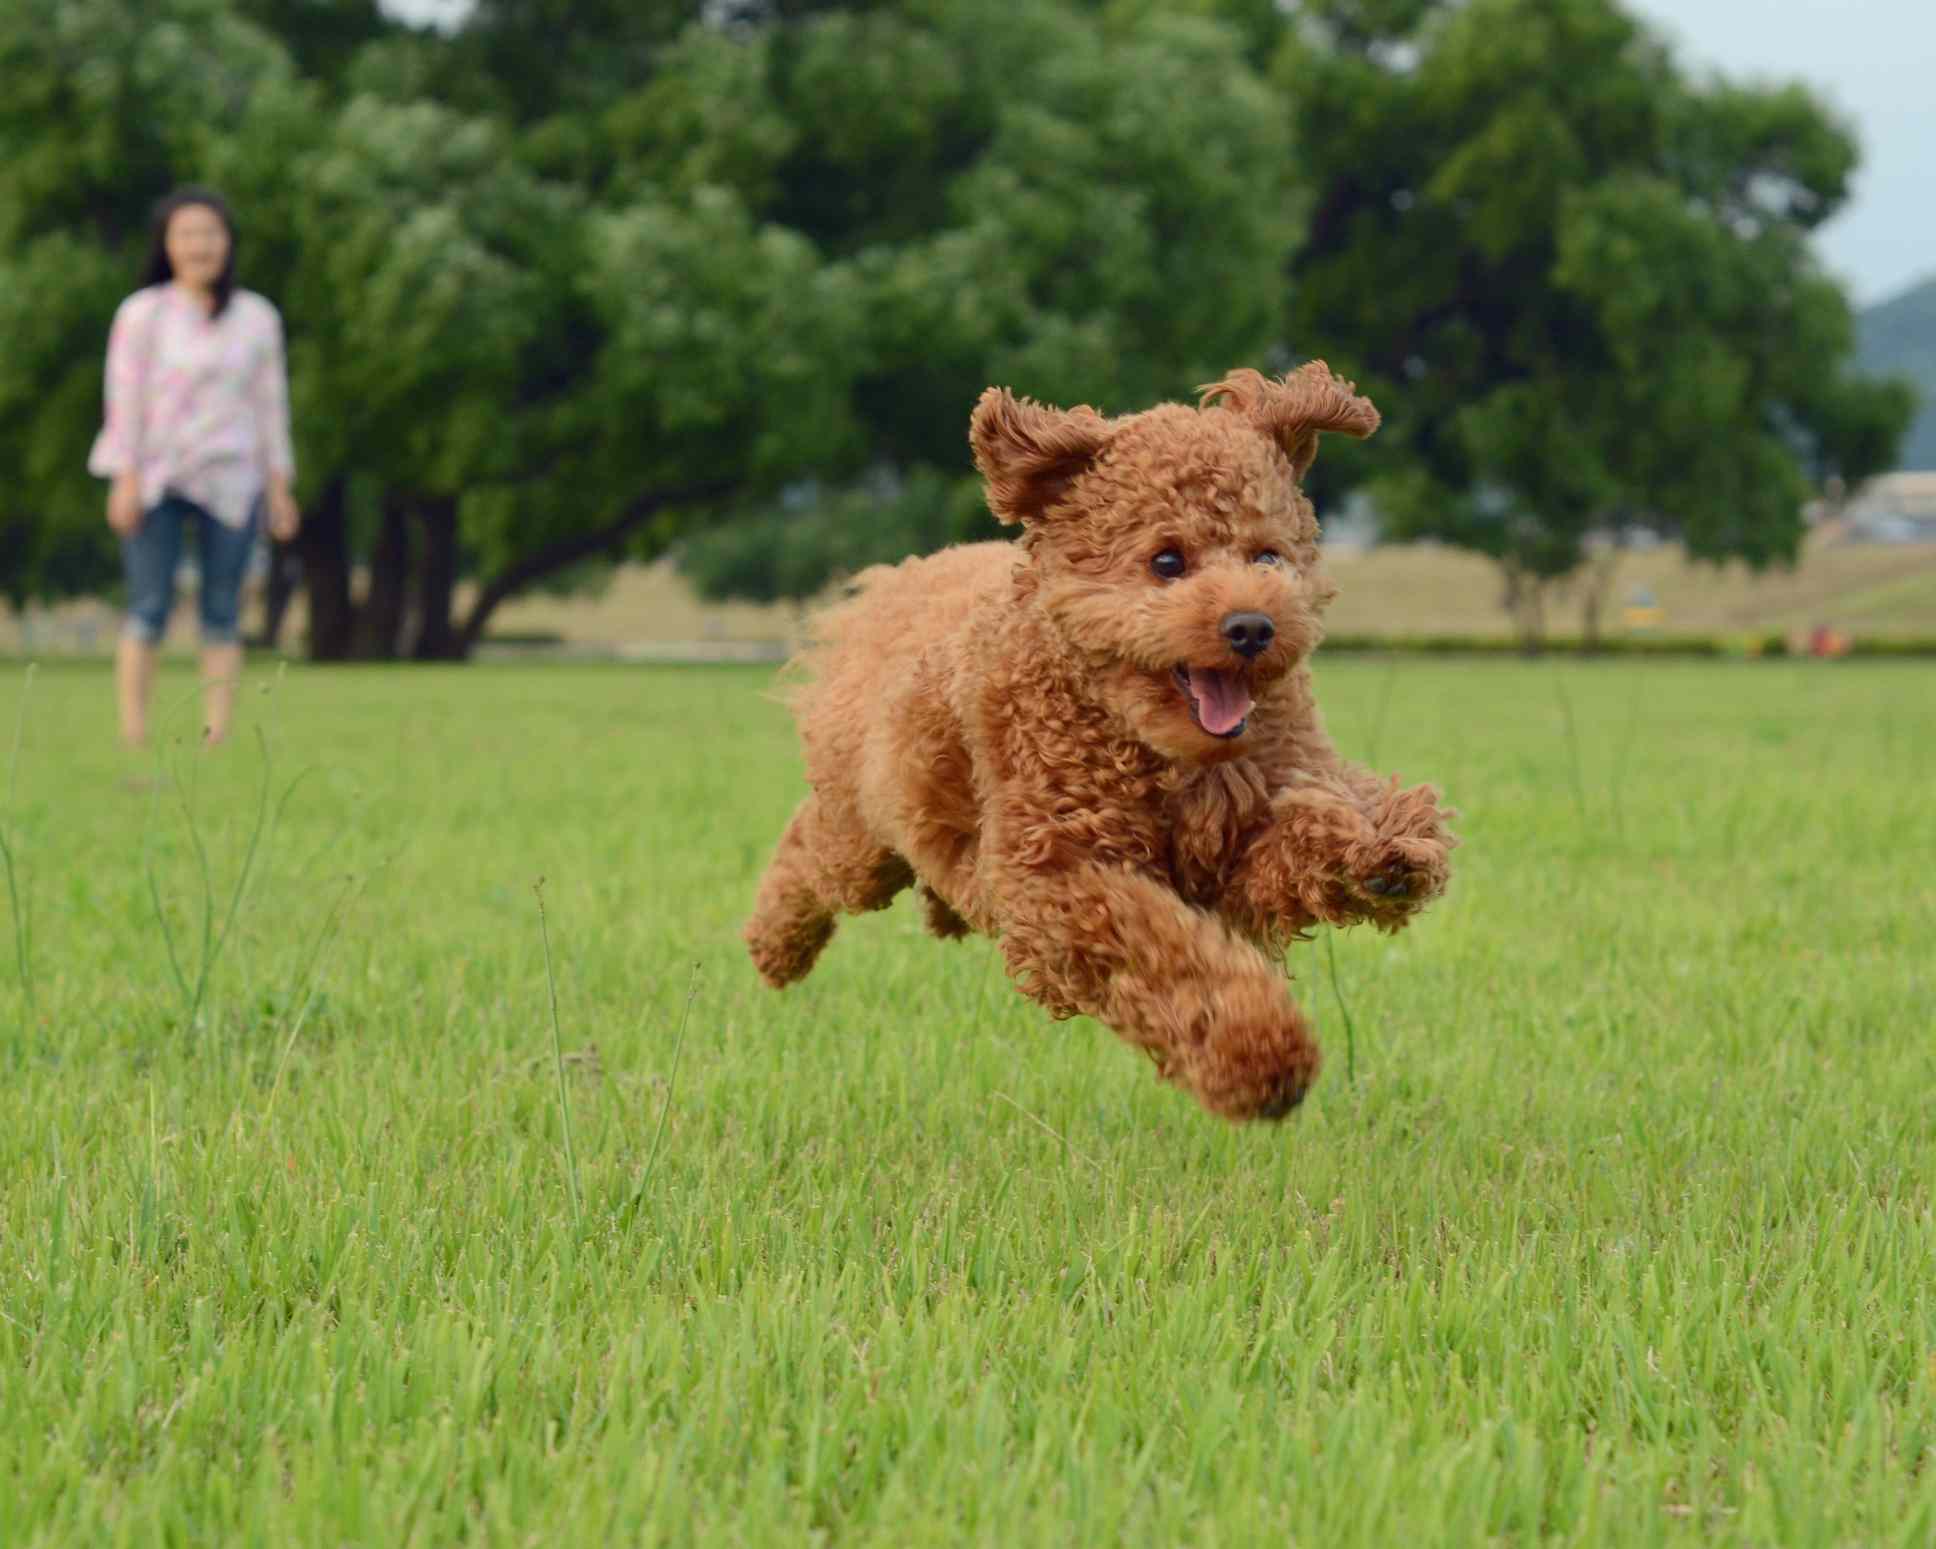 Apricot poodle running across grass